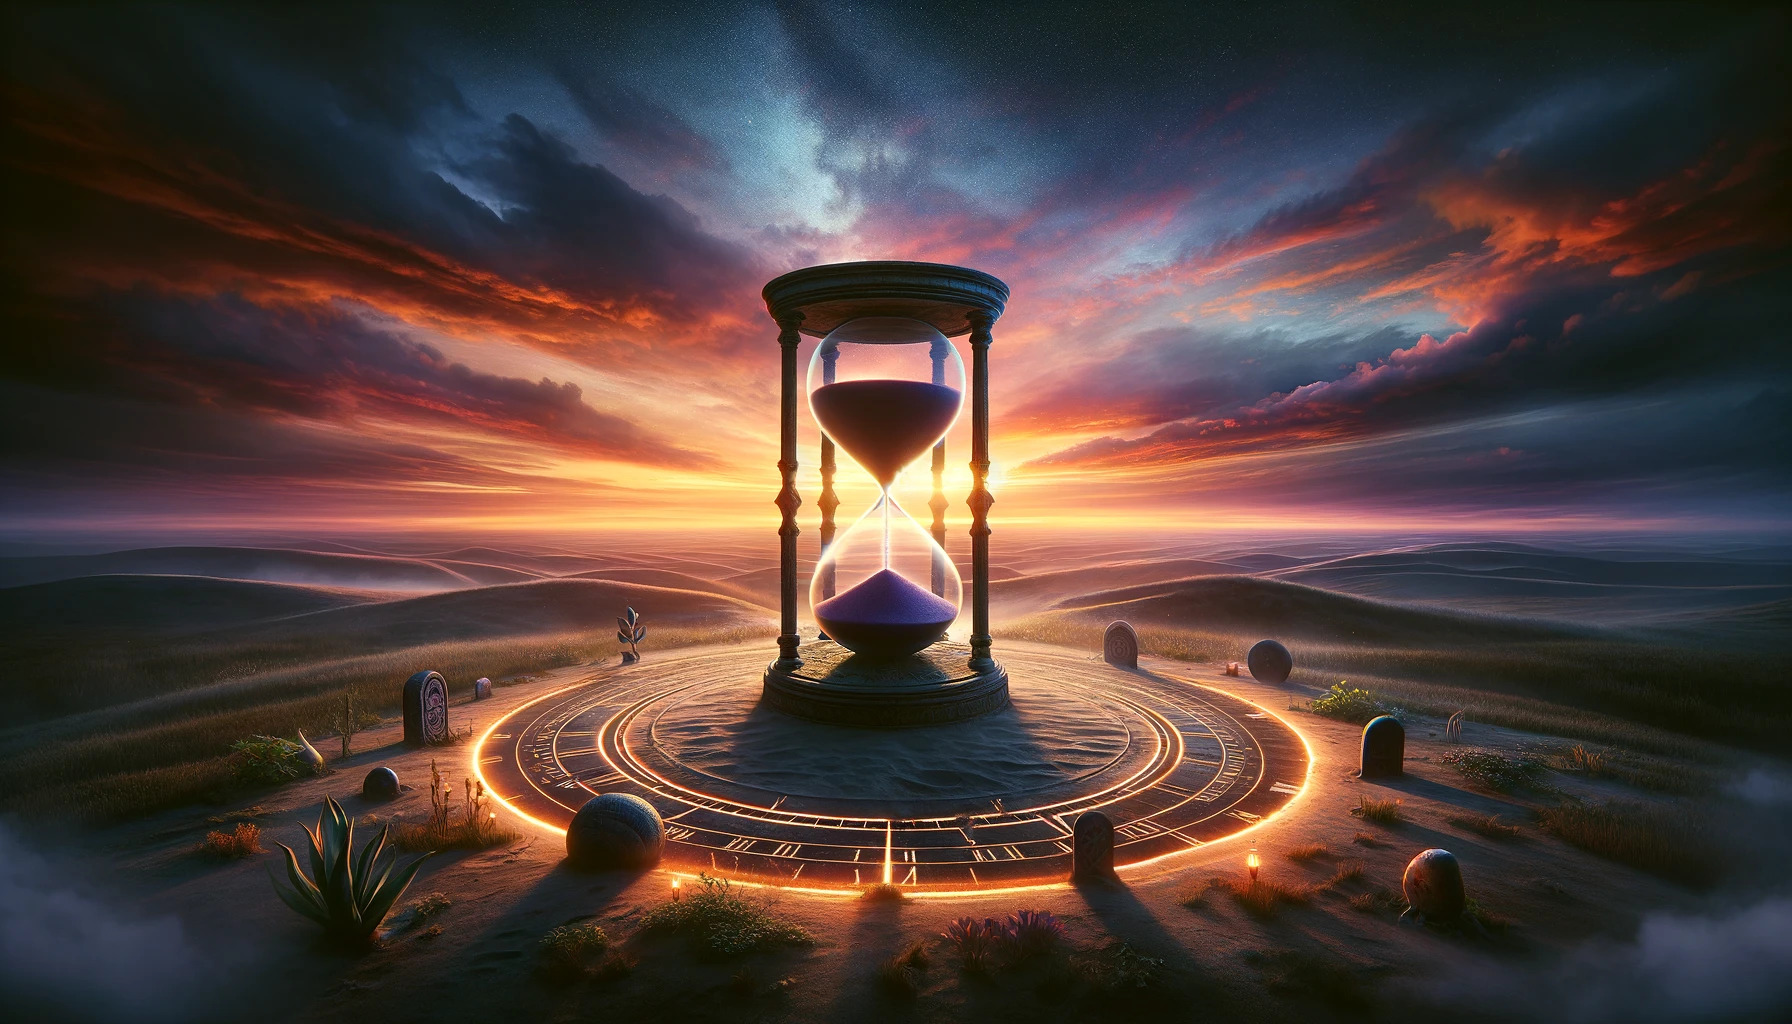 The image captures the essence of anticipation and the passage of time, inspired by the concept of "14 days from today." It's a vivid portrayal of dawn breaking over a landscape, with an ancient hourglass marking the relentless flow of time amidst symbols of days passing. This scene invites you to reflect on the journey and the potential that lies ahead.